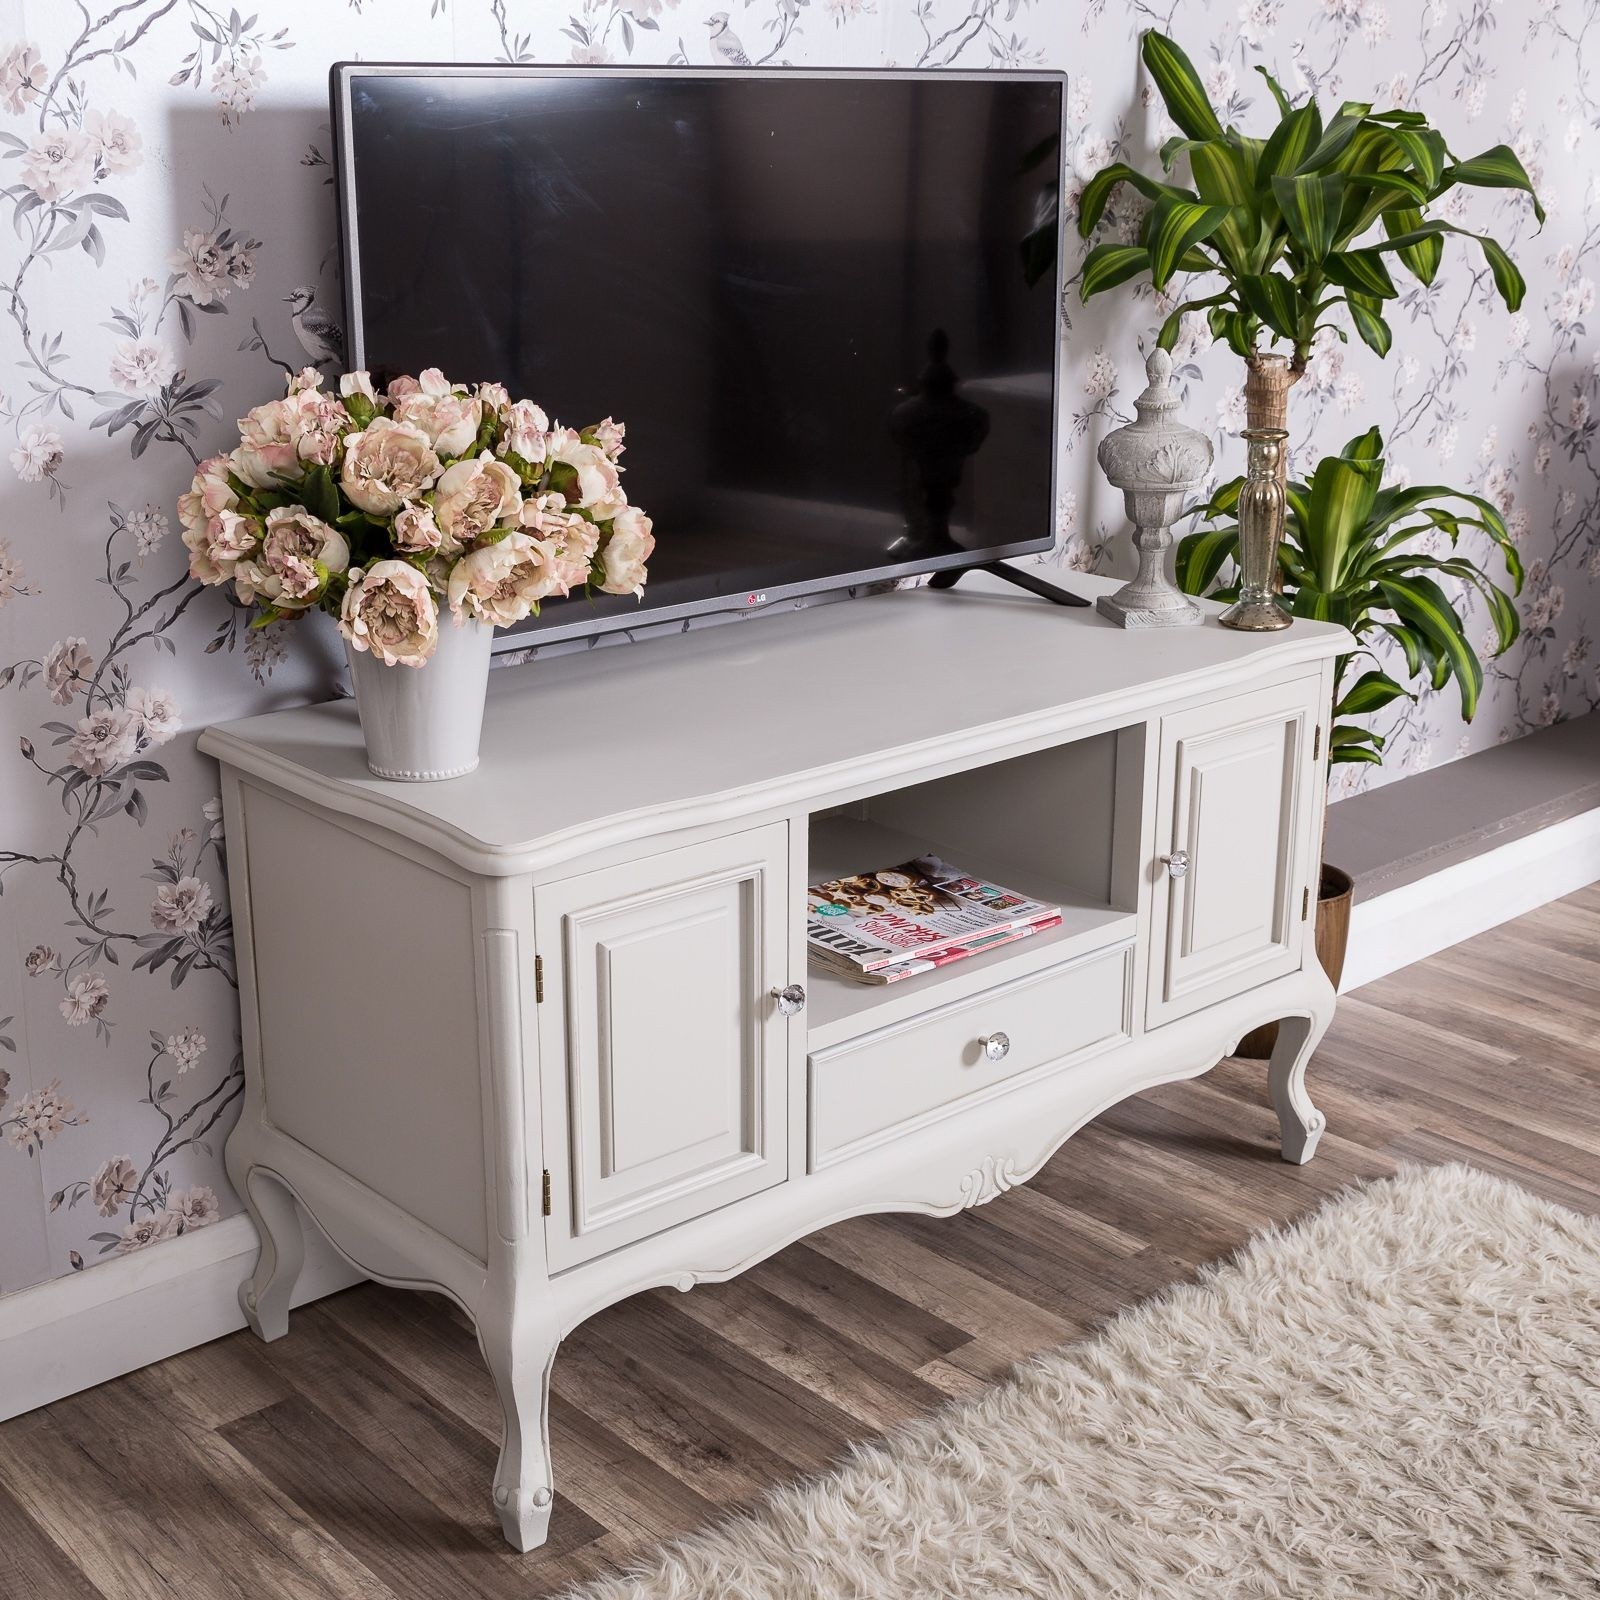 A stunning traditional style grey television stand with